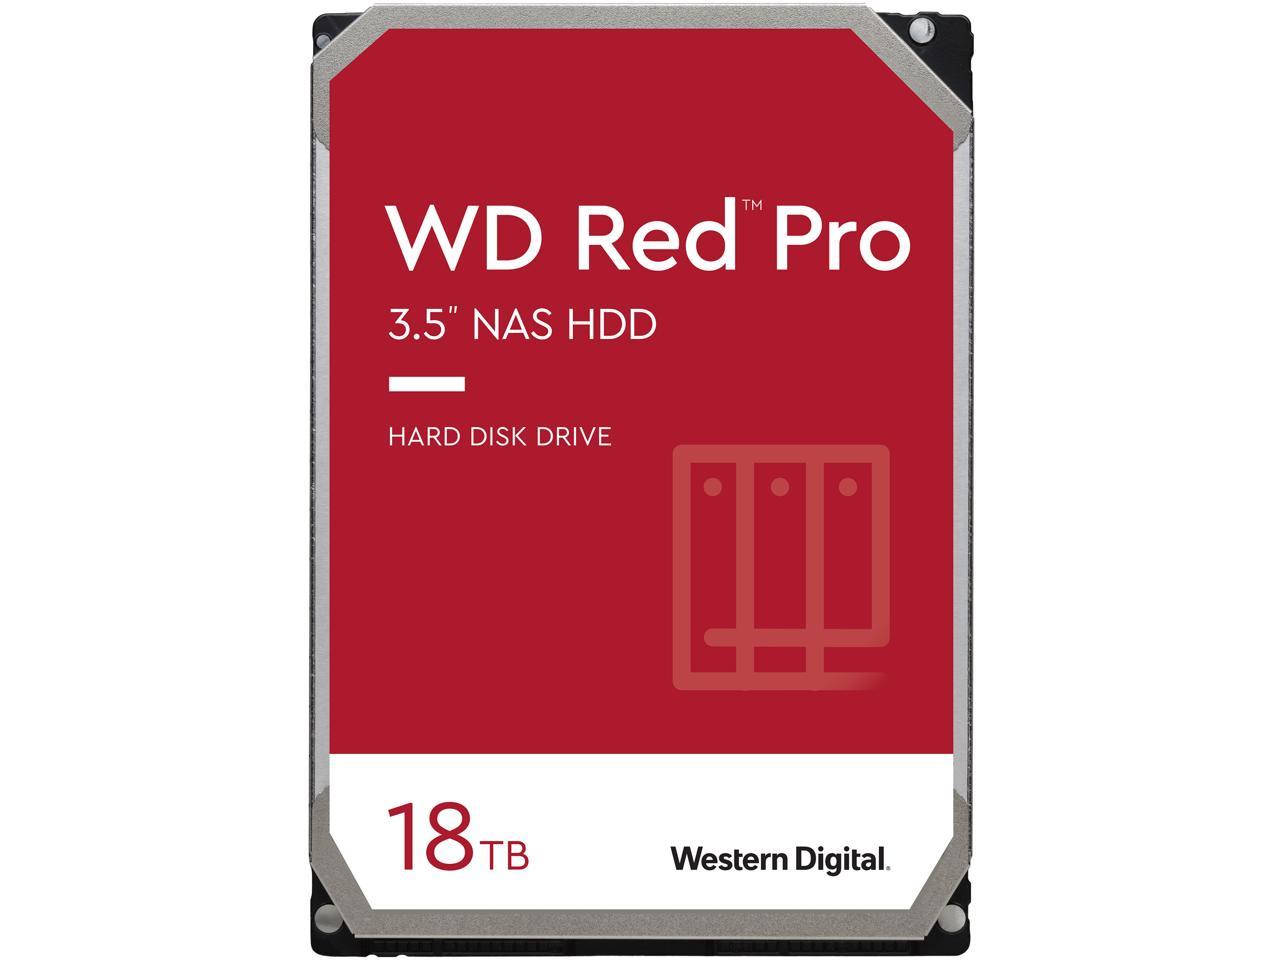 18TB Western Digital Red Pro NAS Hard Drive $285 (@Newegg and various retailers) 14TB Red Plus / $210;  20TB Red Pro / $330 @Amazon